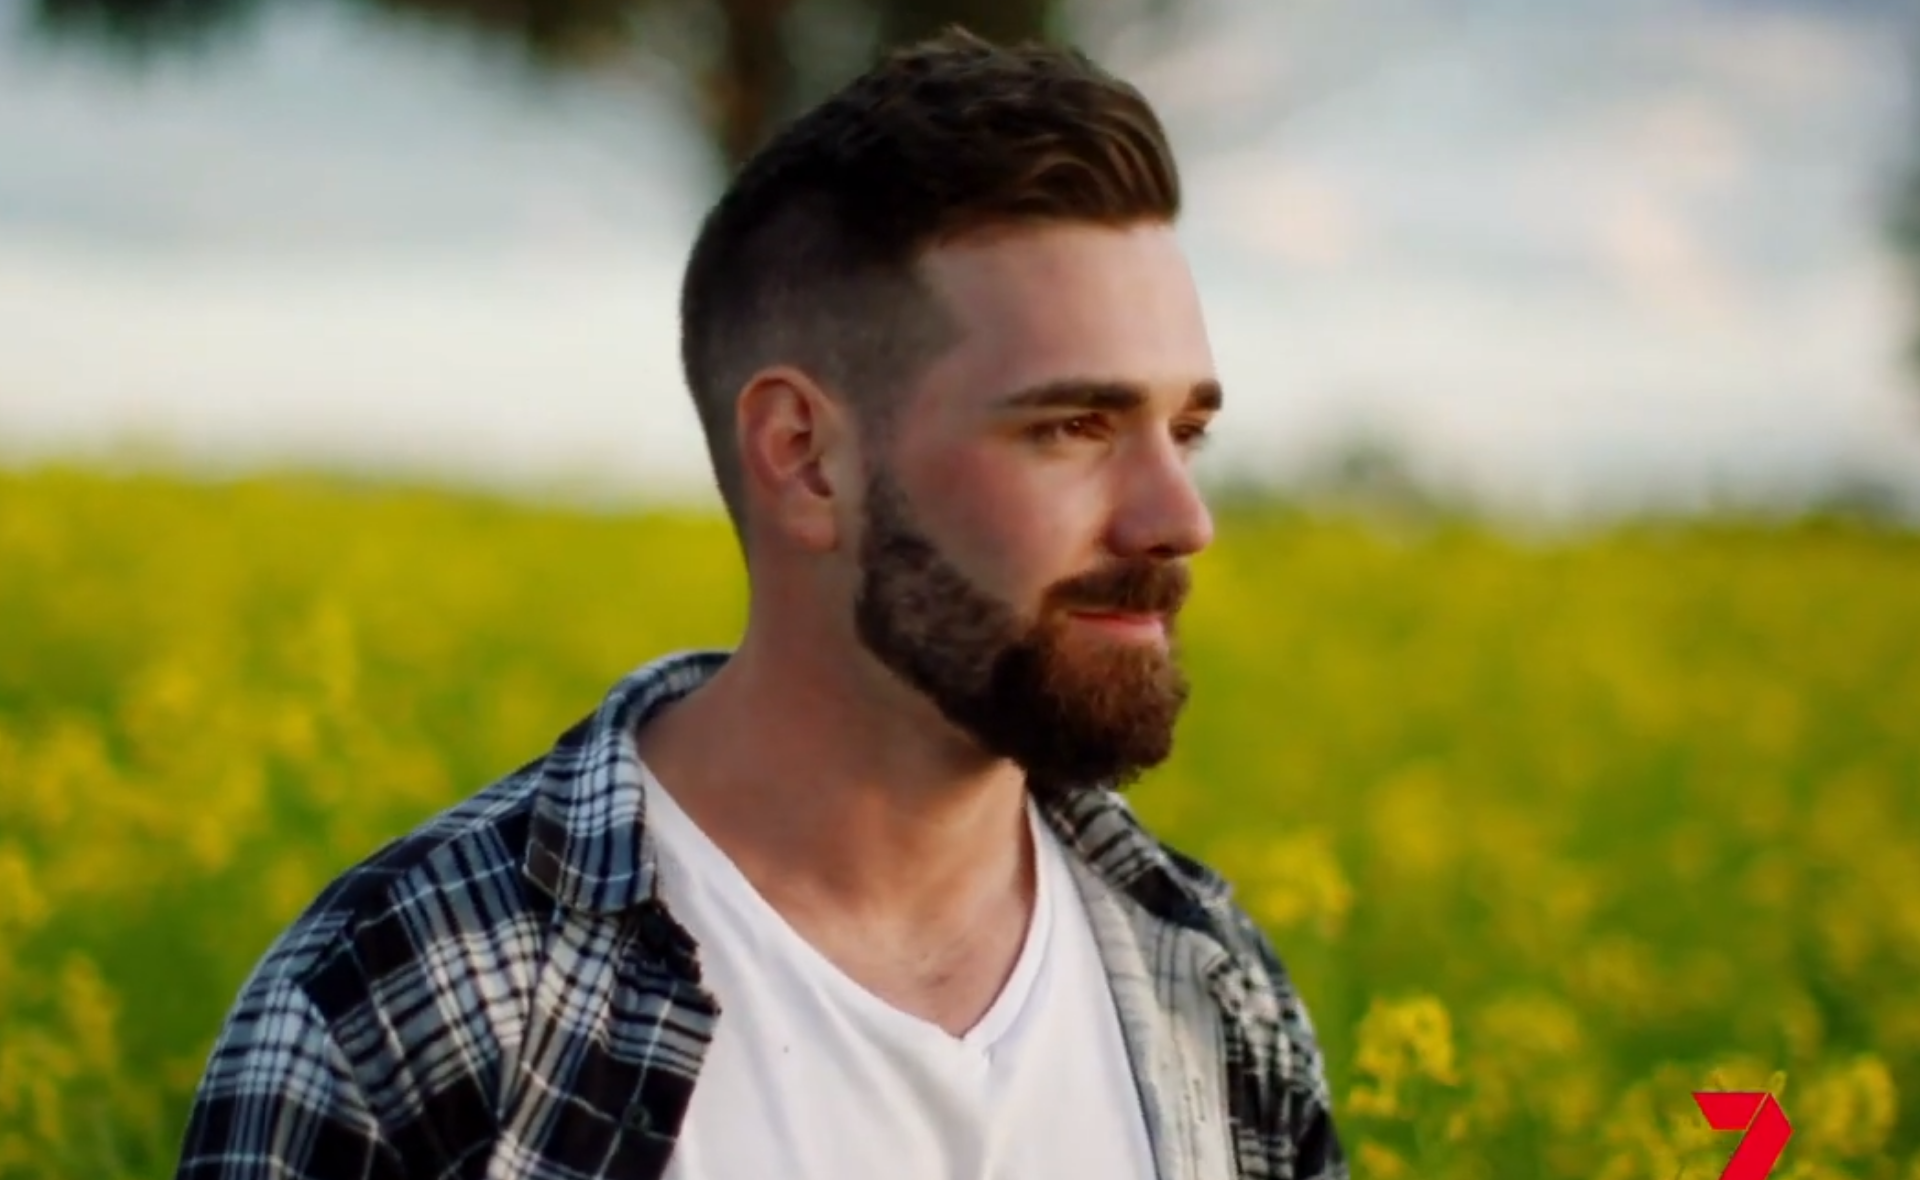 The first teaser for Farmer Wants A Wife’s 2021 season introduces us to Farmer Sam, who is already torn between two ladies